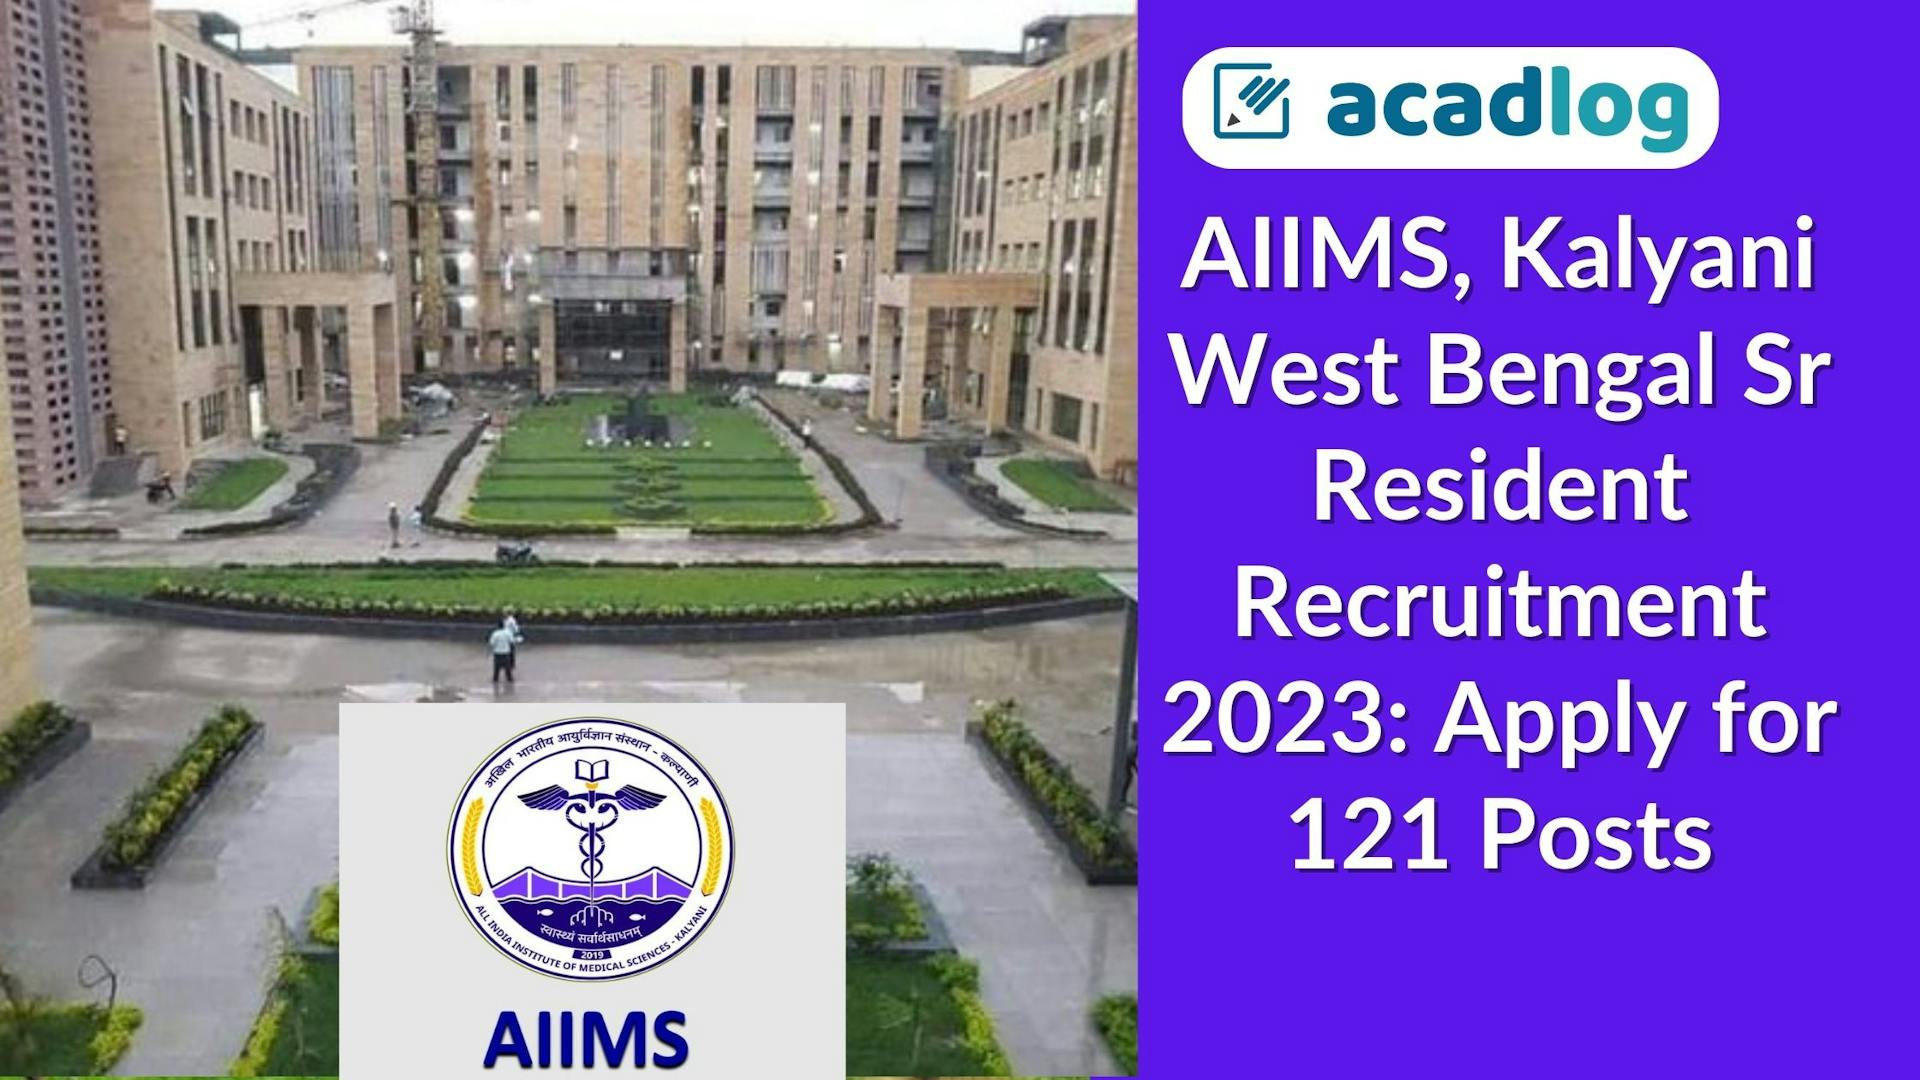 AIIMS, Kalyani West Bengal Sr Resident Recruitment 2023: Apply for 121 Posts